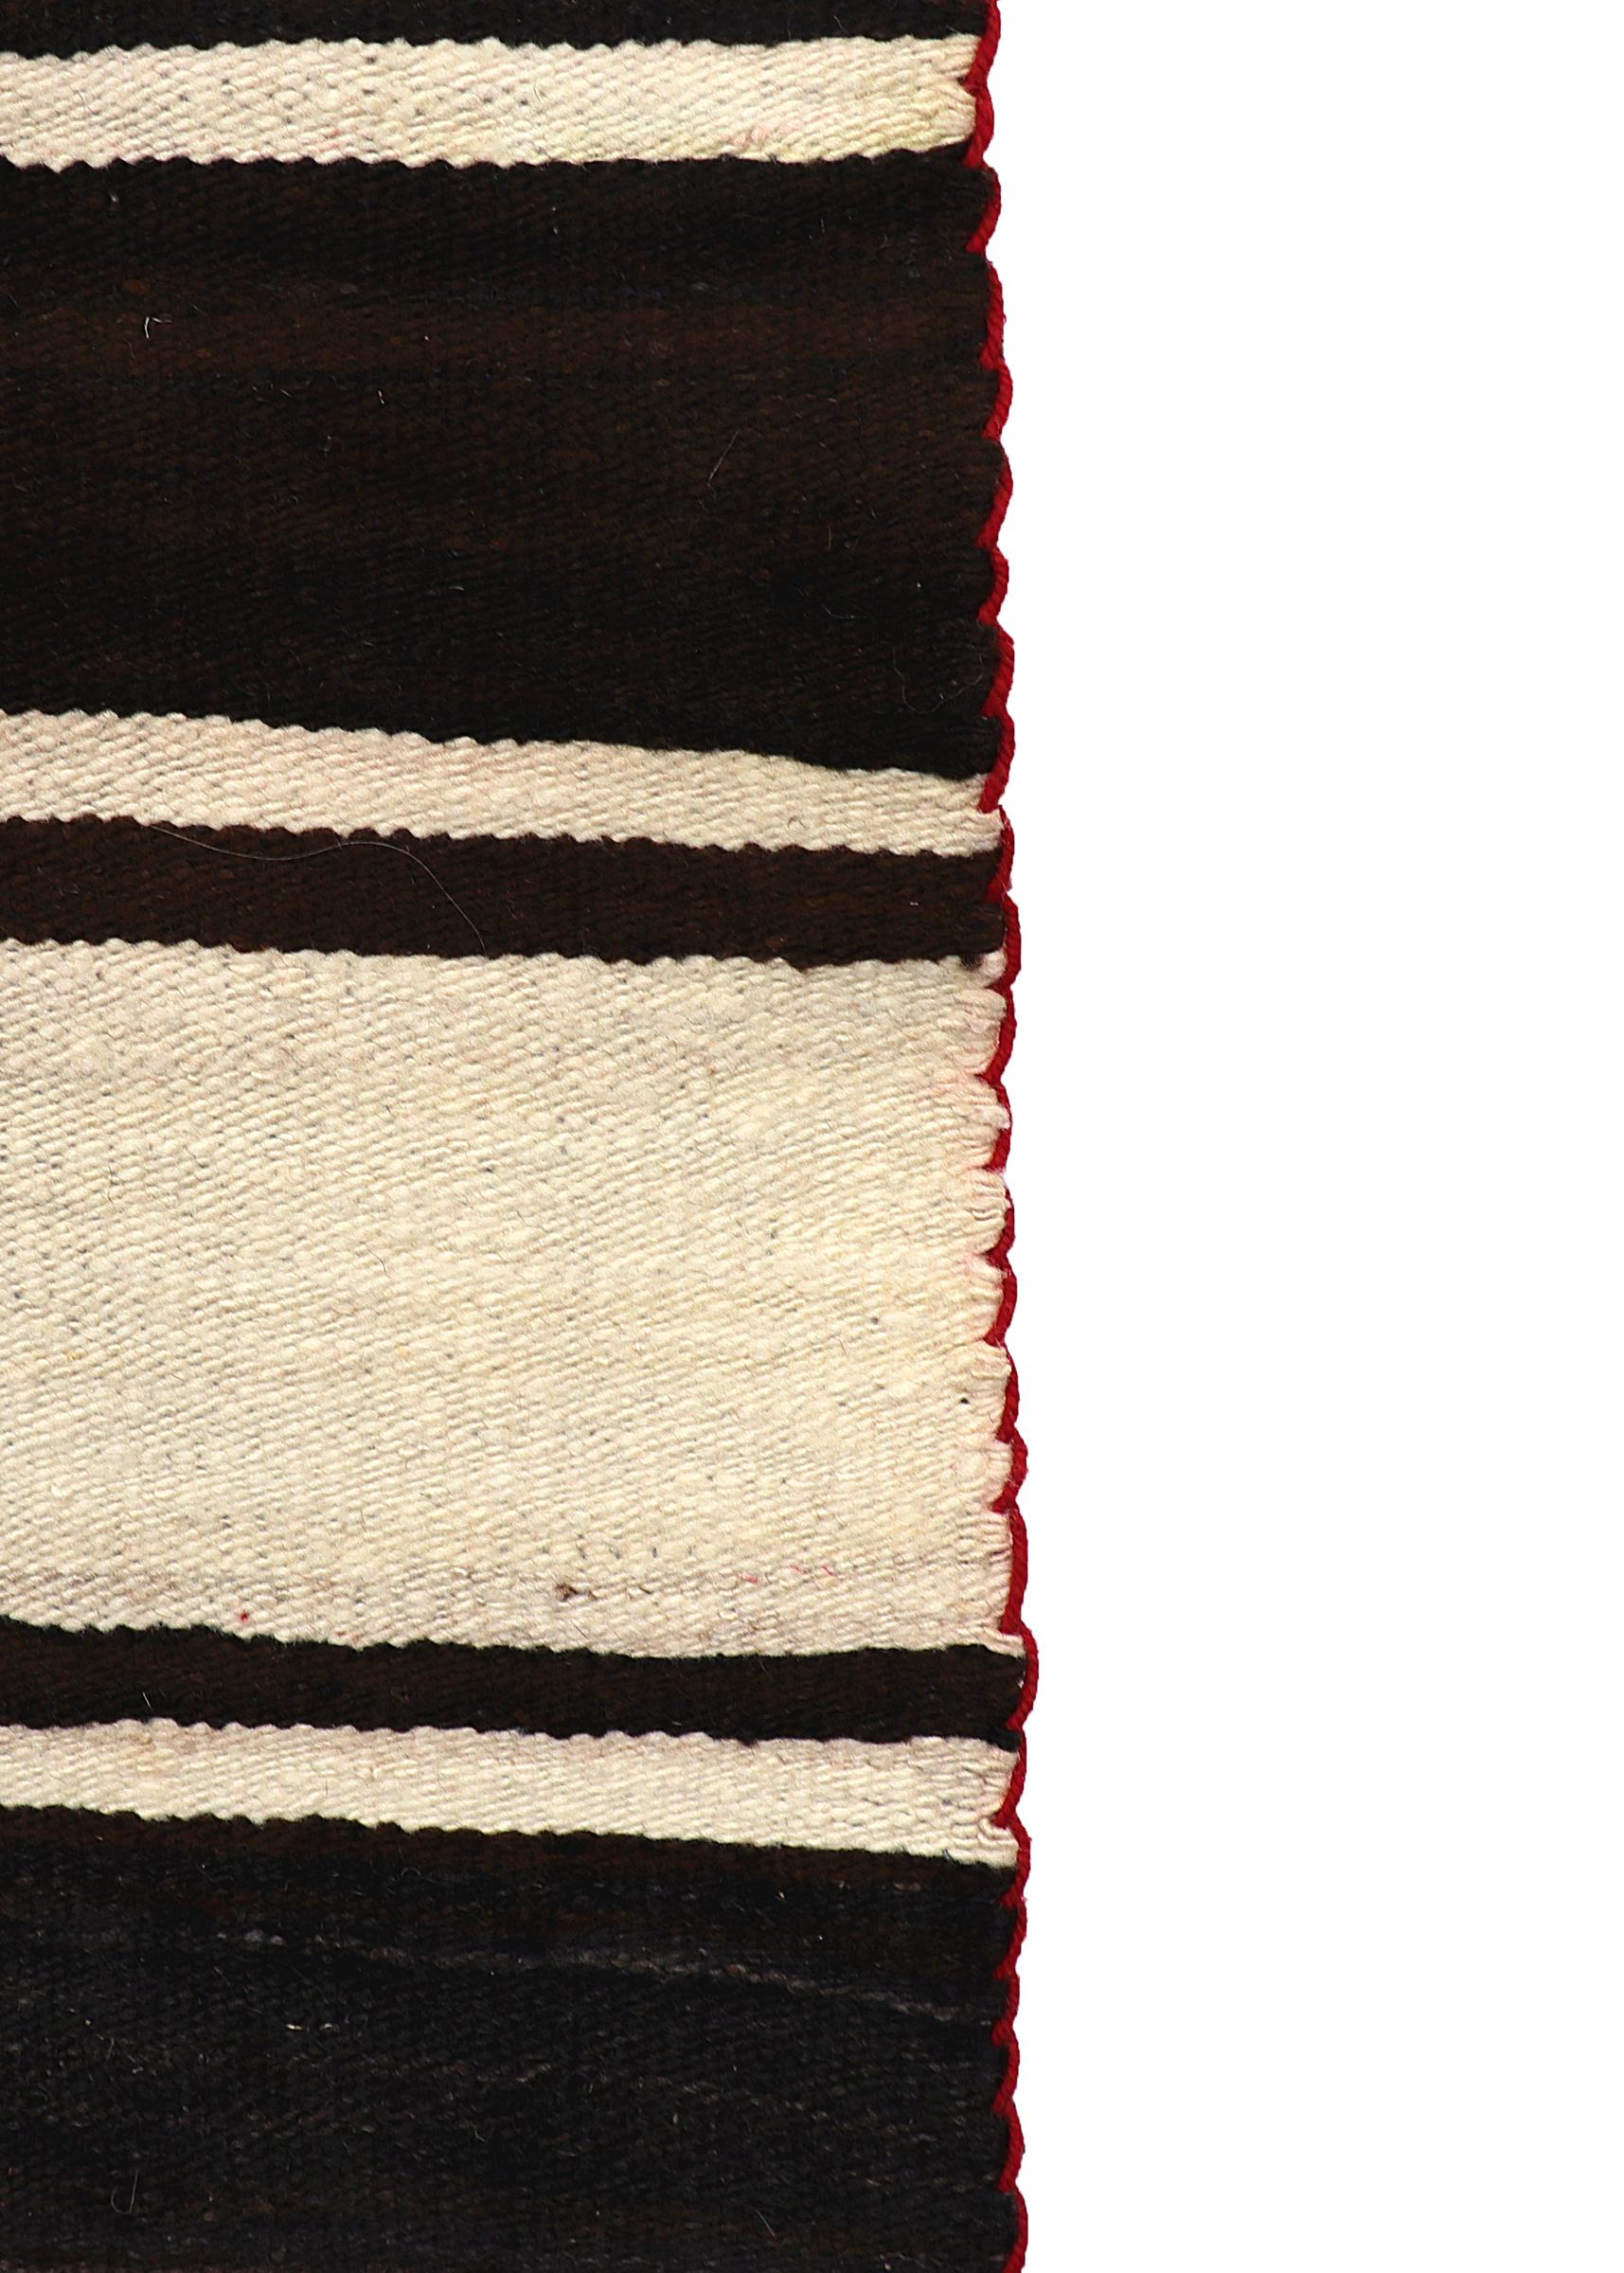 1930s Navajo Chief's Blanket, Wool with Natural Dyes Textile In Good Condition For Sale In Denver, CO